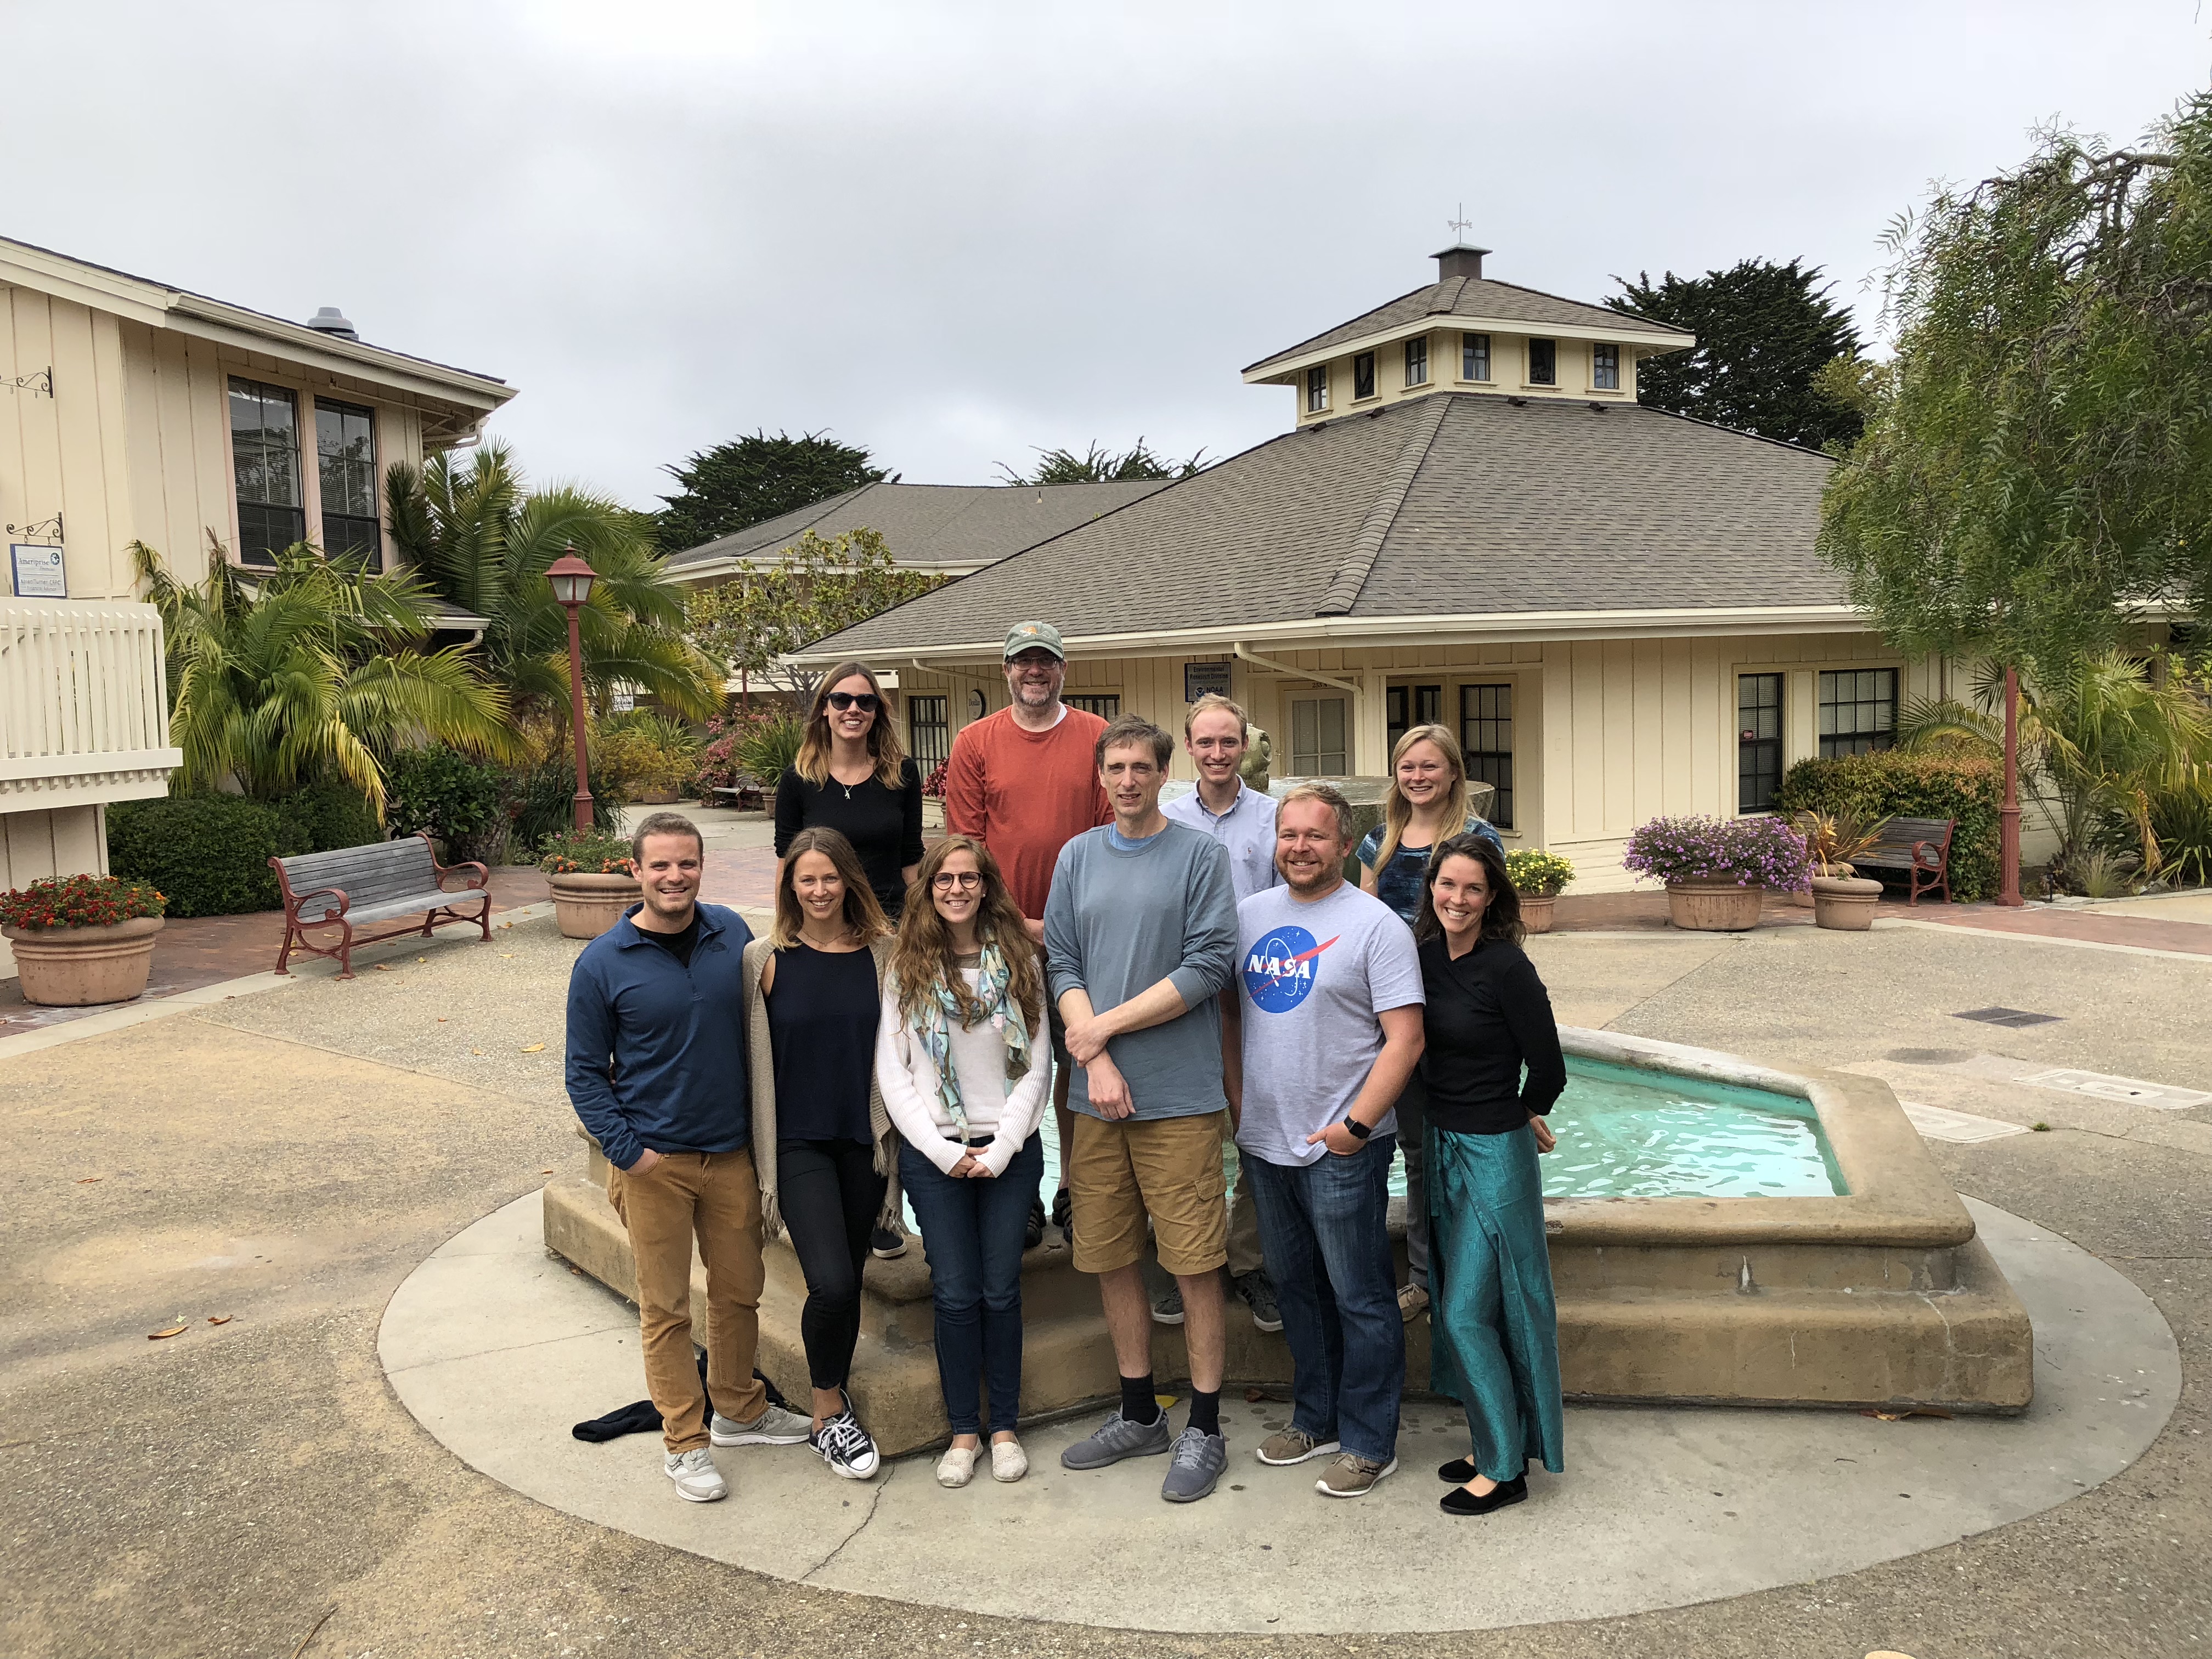 Adrien Bouissou (top row, second from right), Class of 2017 NOAA Hollings Scholar, stands with group at NOAA's Southwest Fisheries Science Center in Monterey, California during his summer internship.